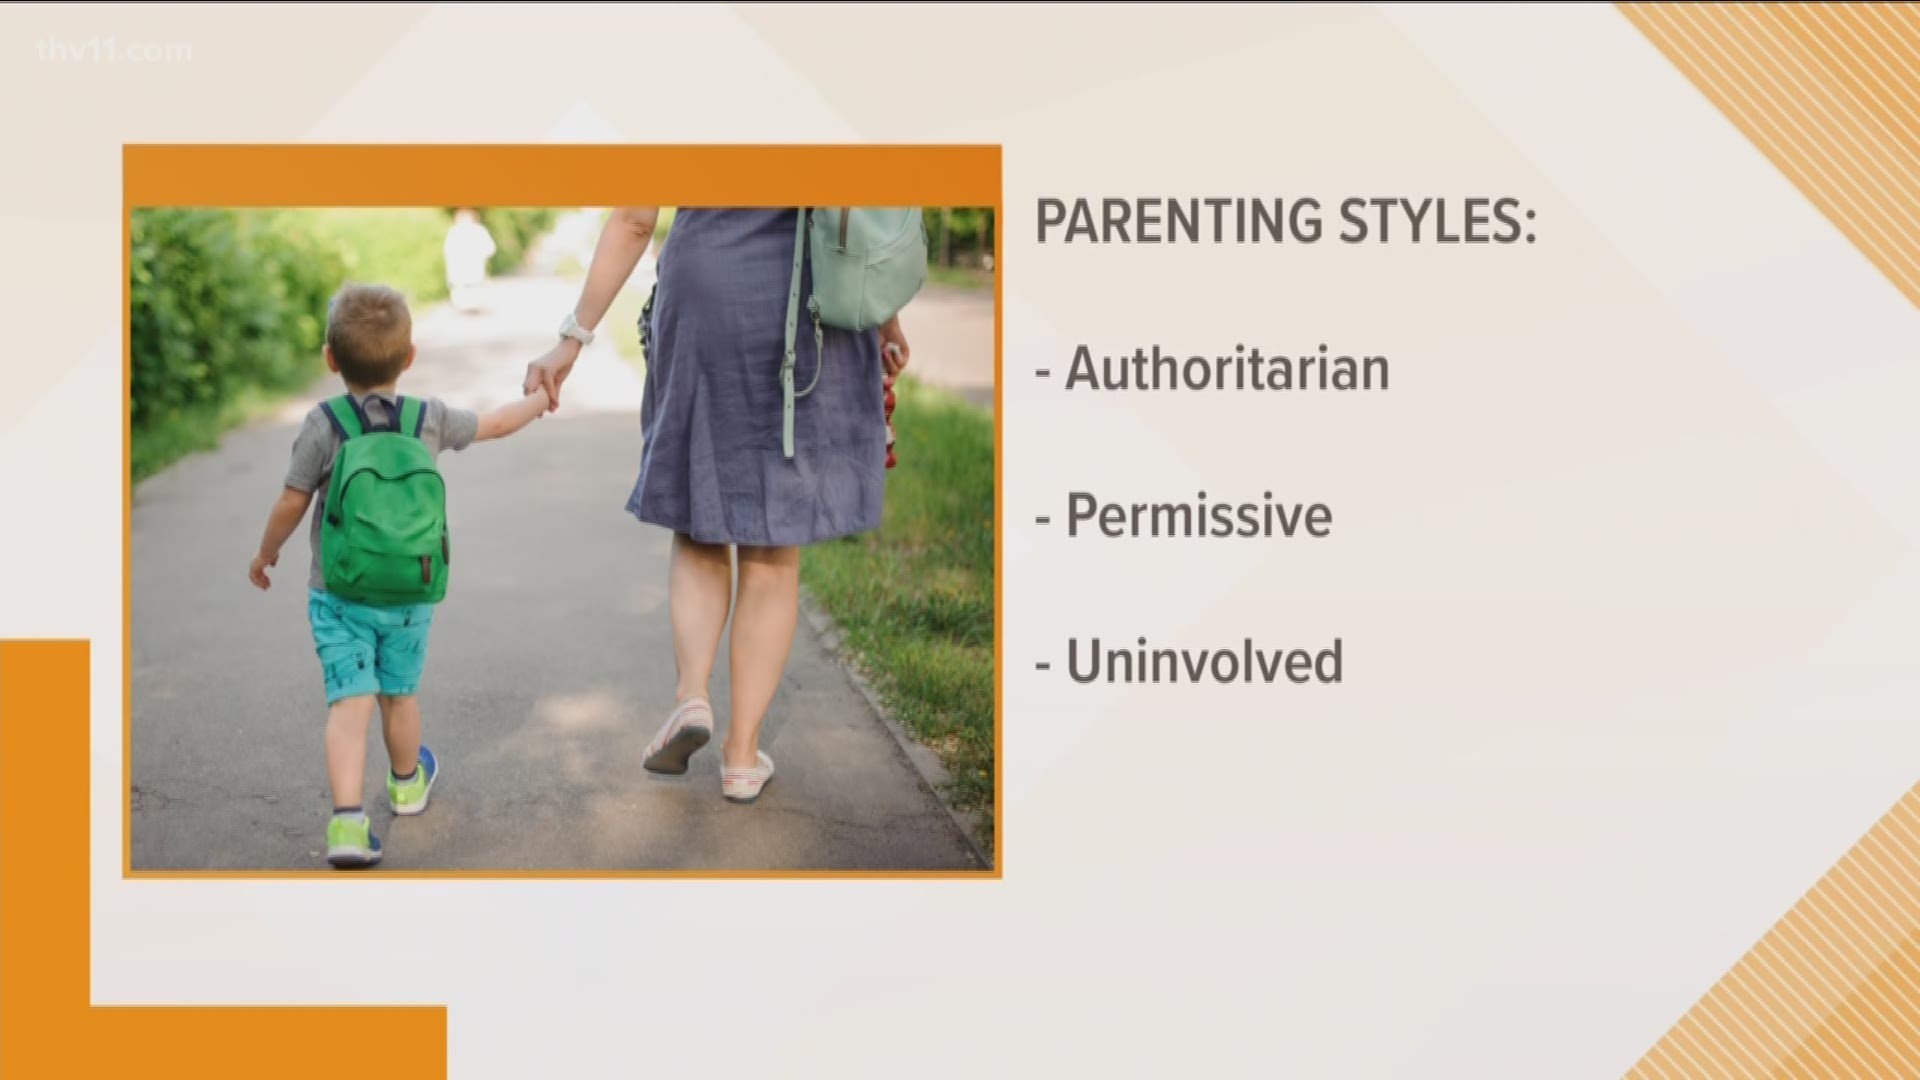 Charlie Simpson with the Arkansas Relationship Counseling Center is here to help manage parenting differences.